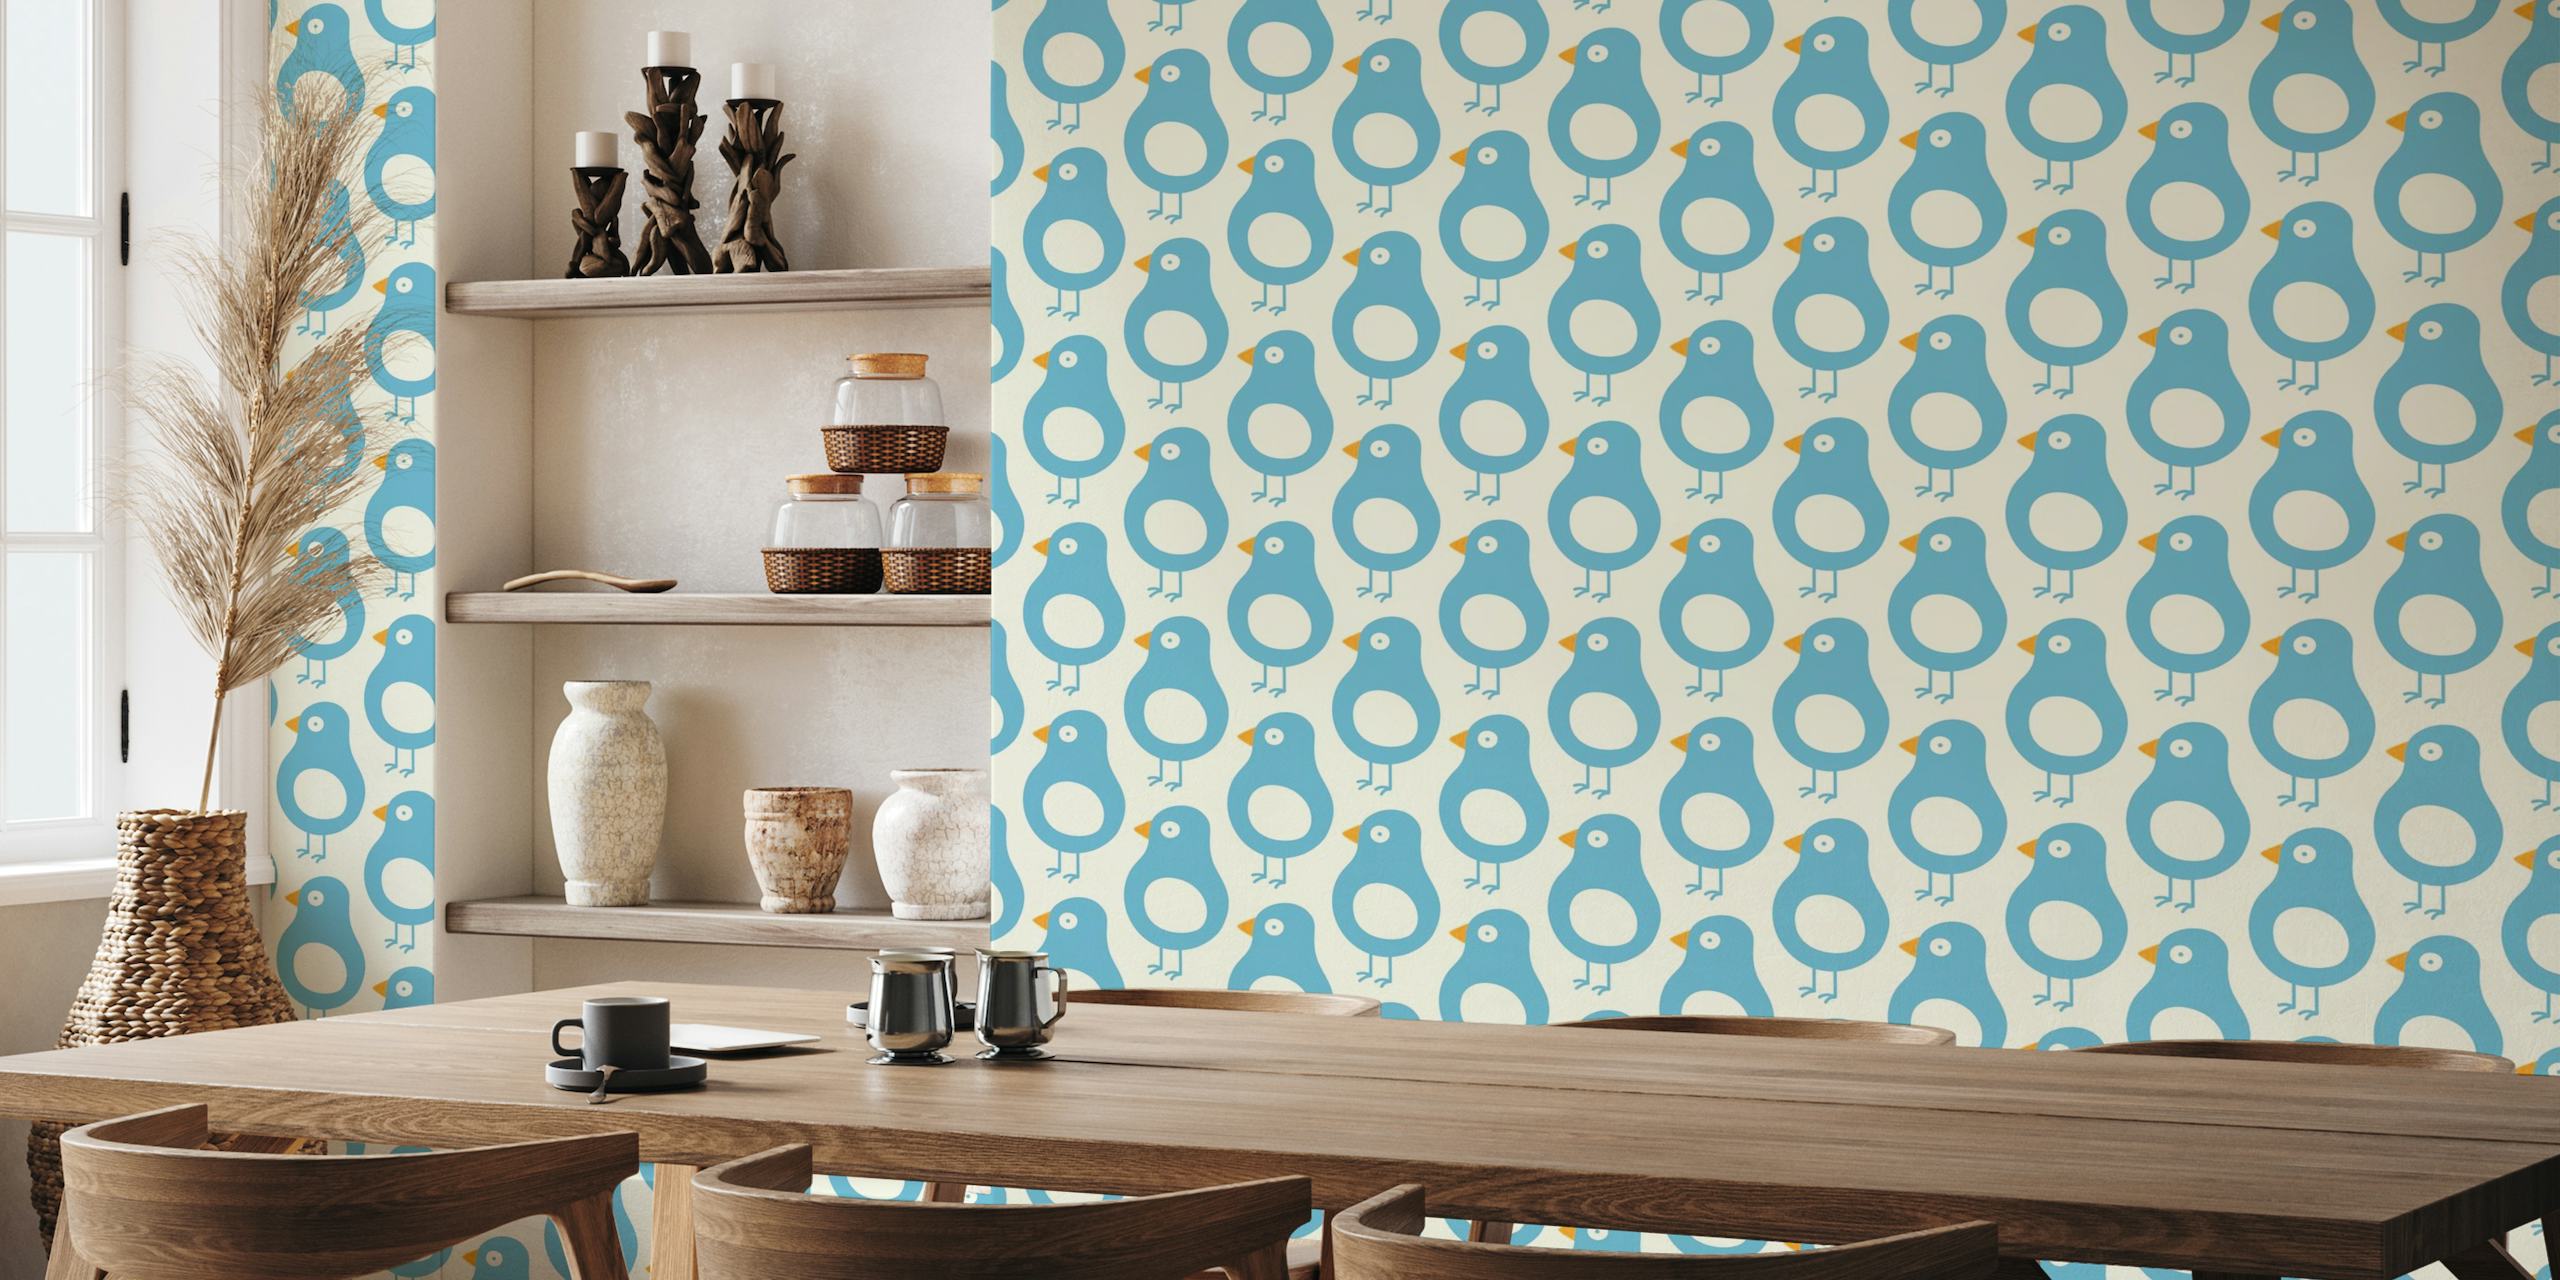 Blue birds pattern wall mural with a cream background